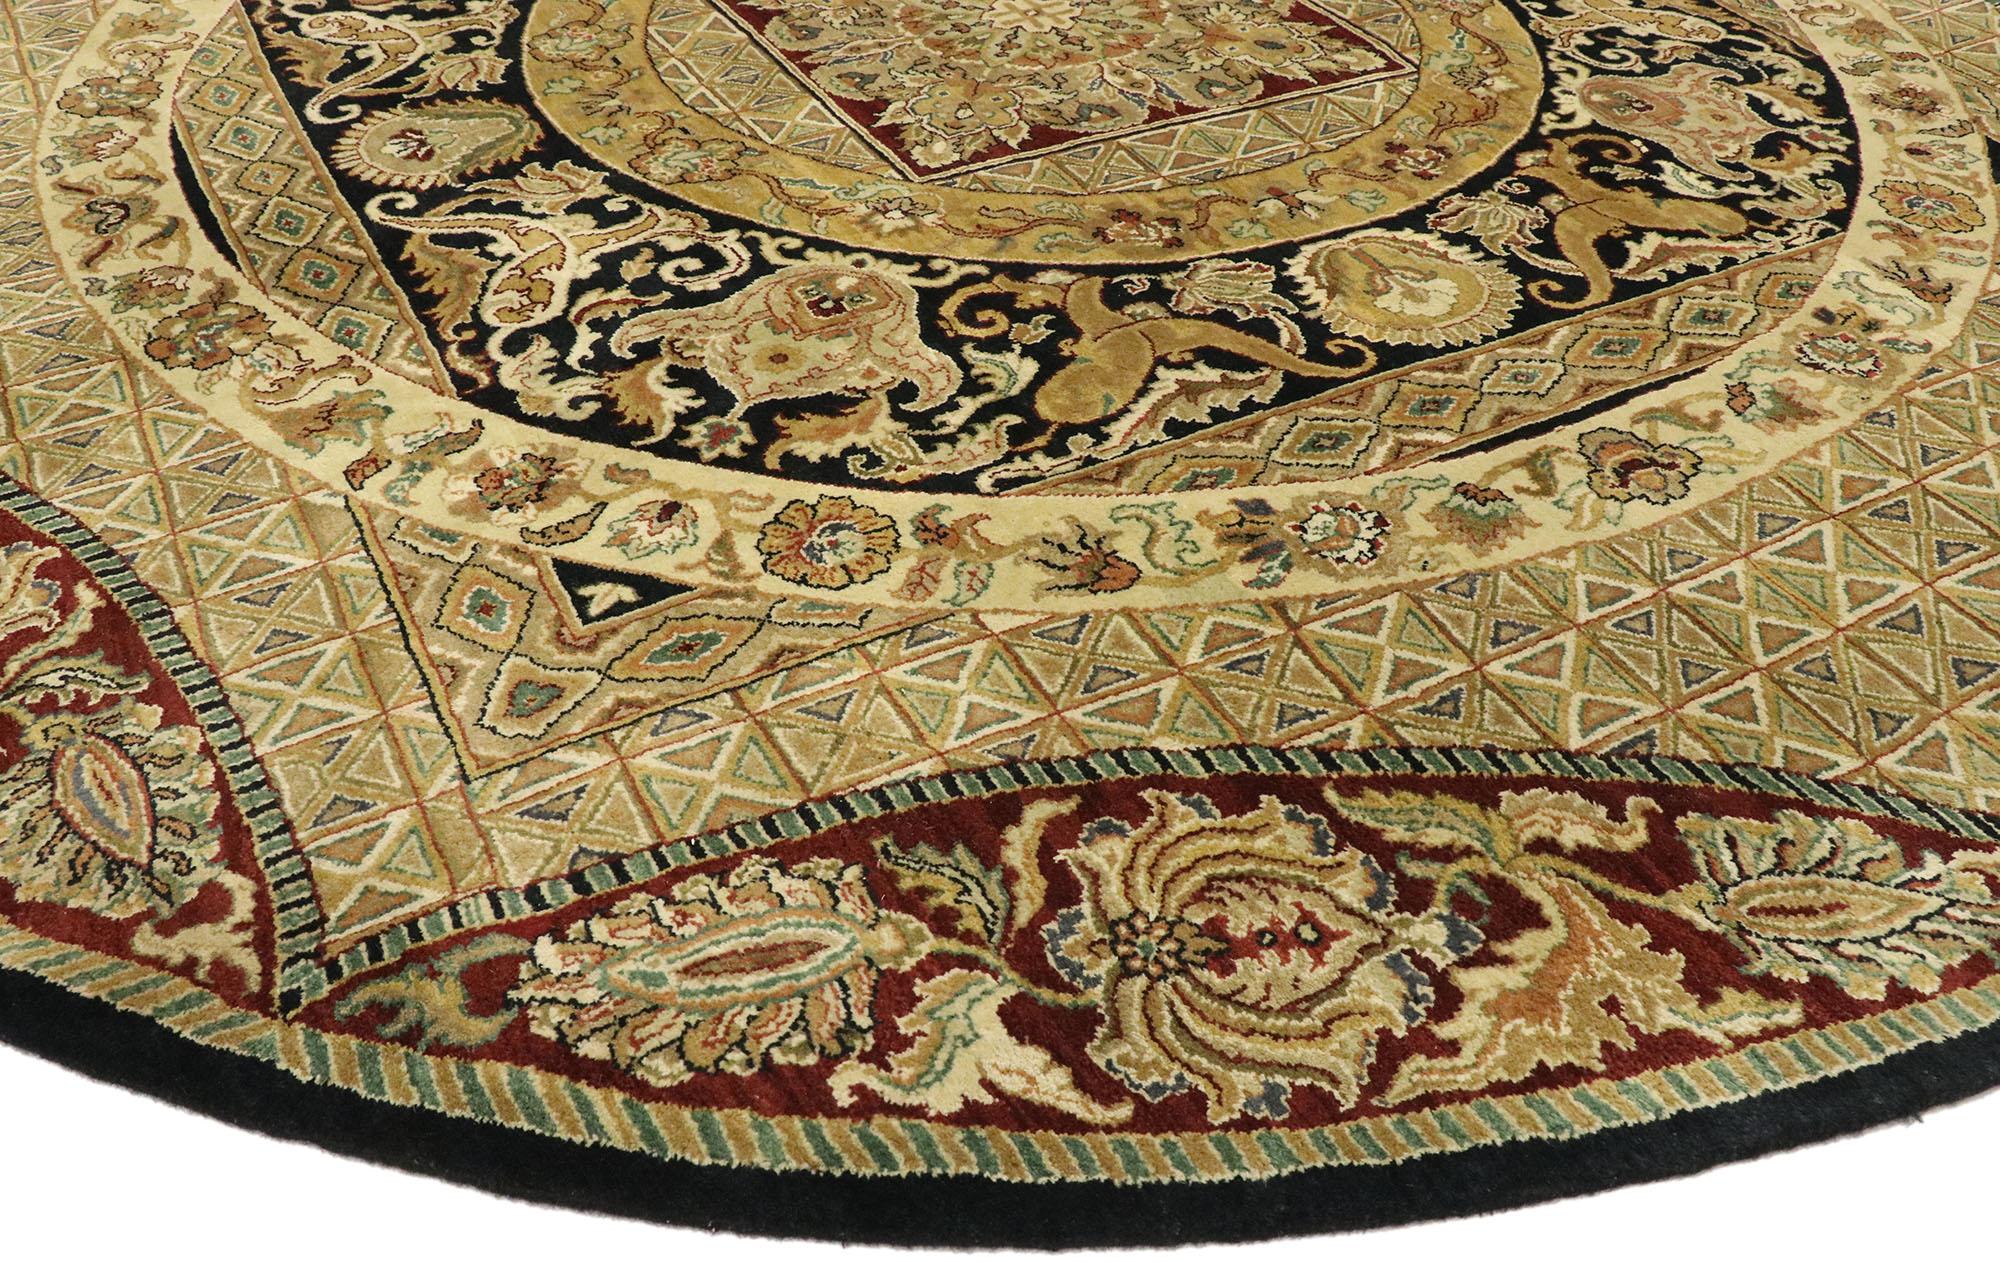 77467 Vintage Indian Round Area Rug, Circular Rug with French Art Nouveau Style. Decorative detailing and effortless beauty meet obliquely feminine vibes with French Art Nouveau style in this hand knotted wool vintage Indian round area rug. The